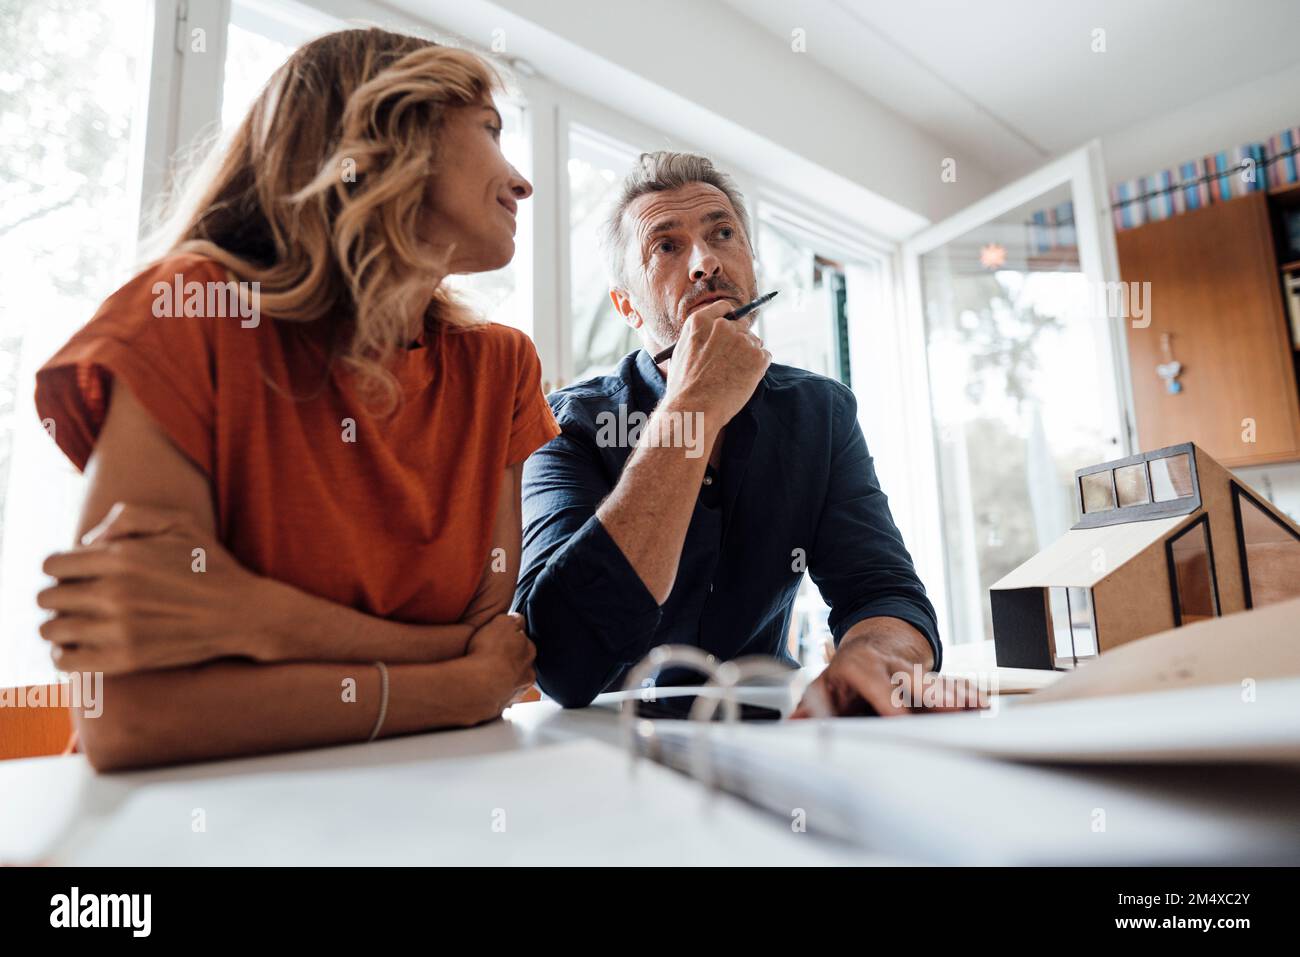 Mature man and woman discussing over real estate contract at table Stock Photo